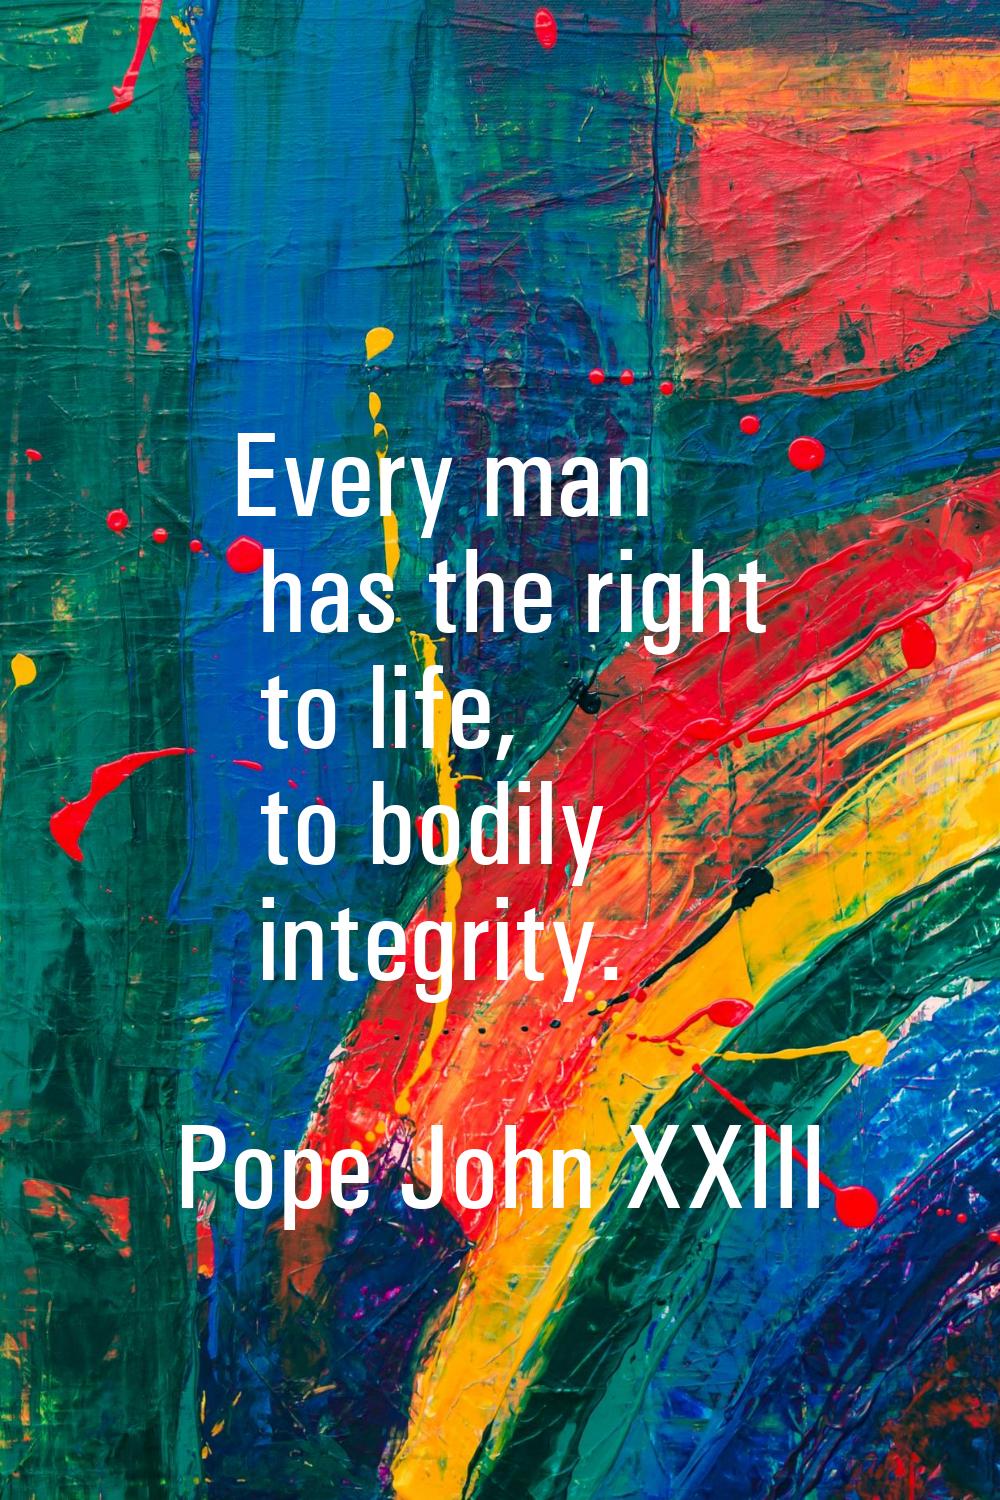 Every man has the right to life, to bodily integrity.